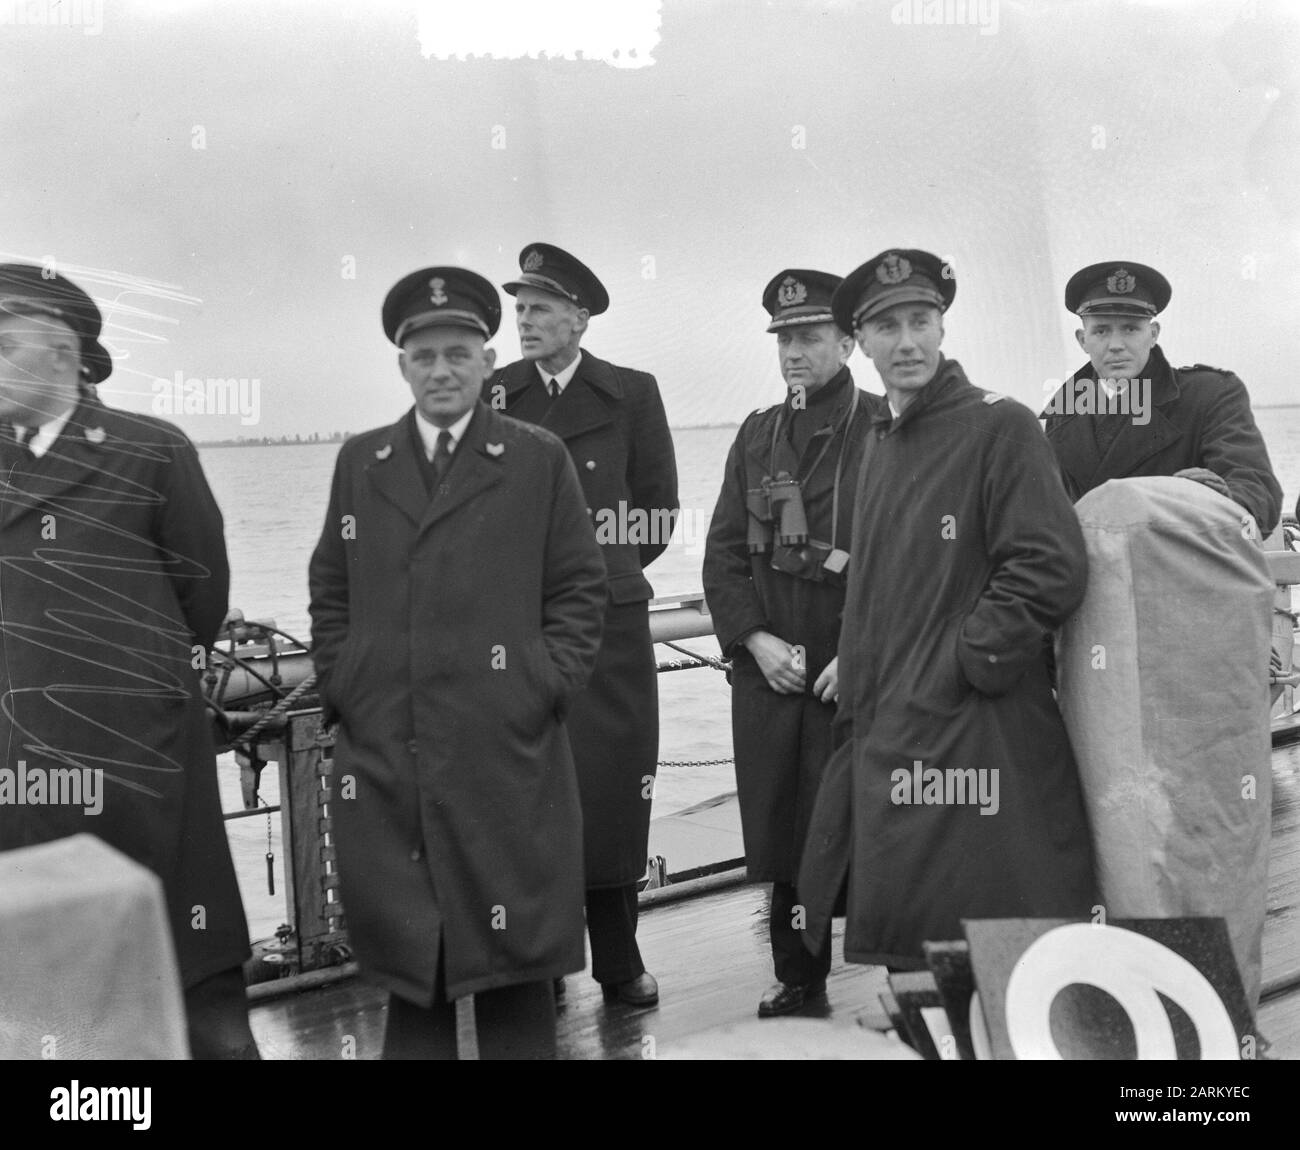 Royal Navy Navy Navy sailing competition Colonel Bax Date: October 24, 1952 Keywords: MARINE, sailing matches Personal name: Colonel Bax Institution name: Marine Stock Photo